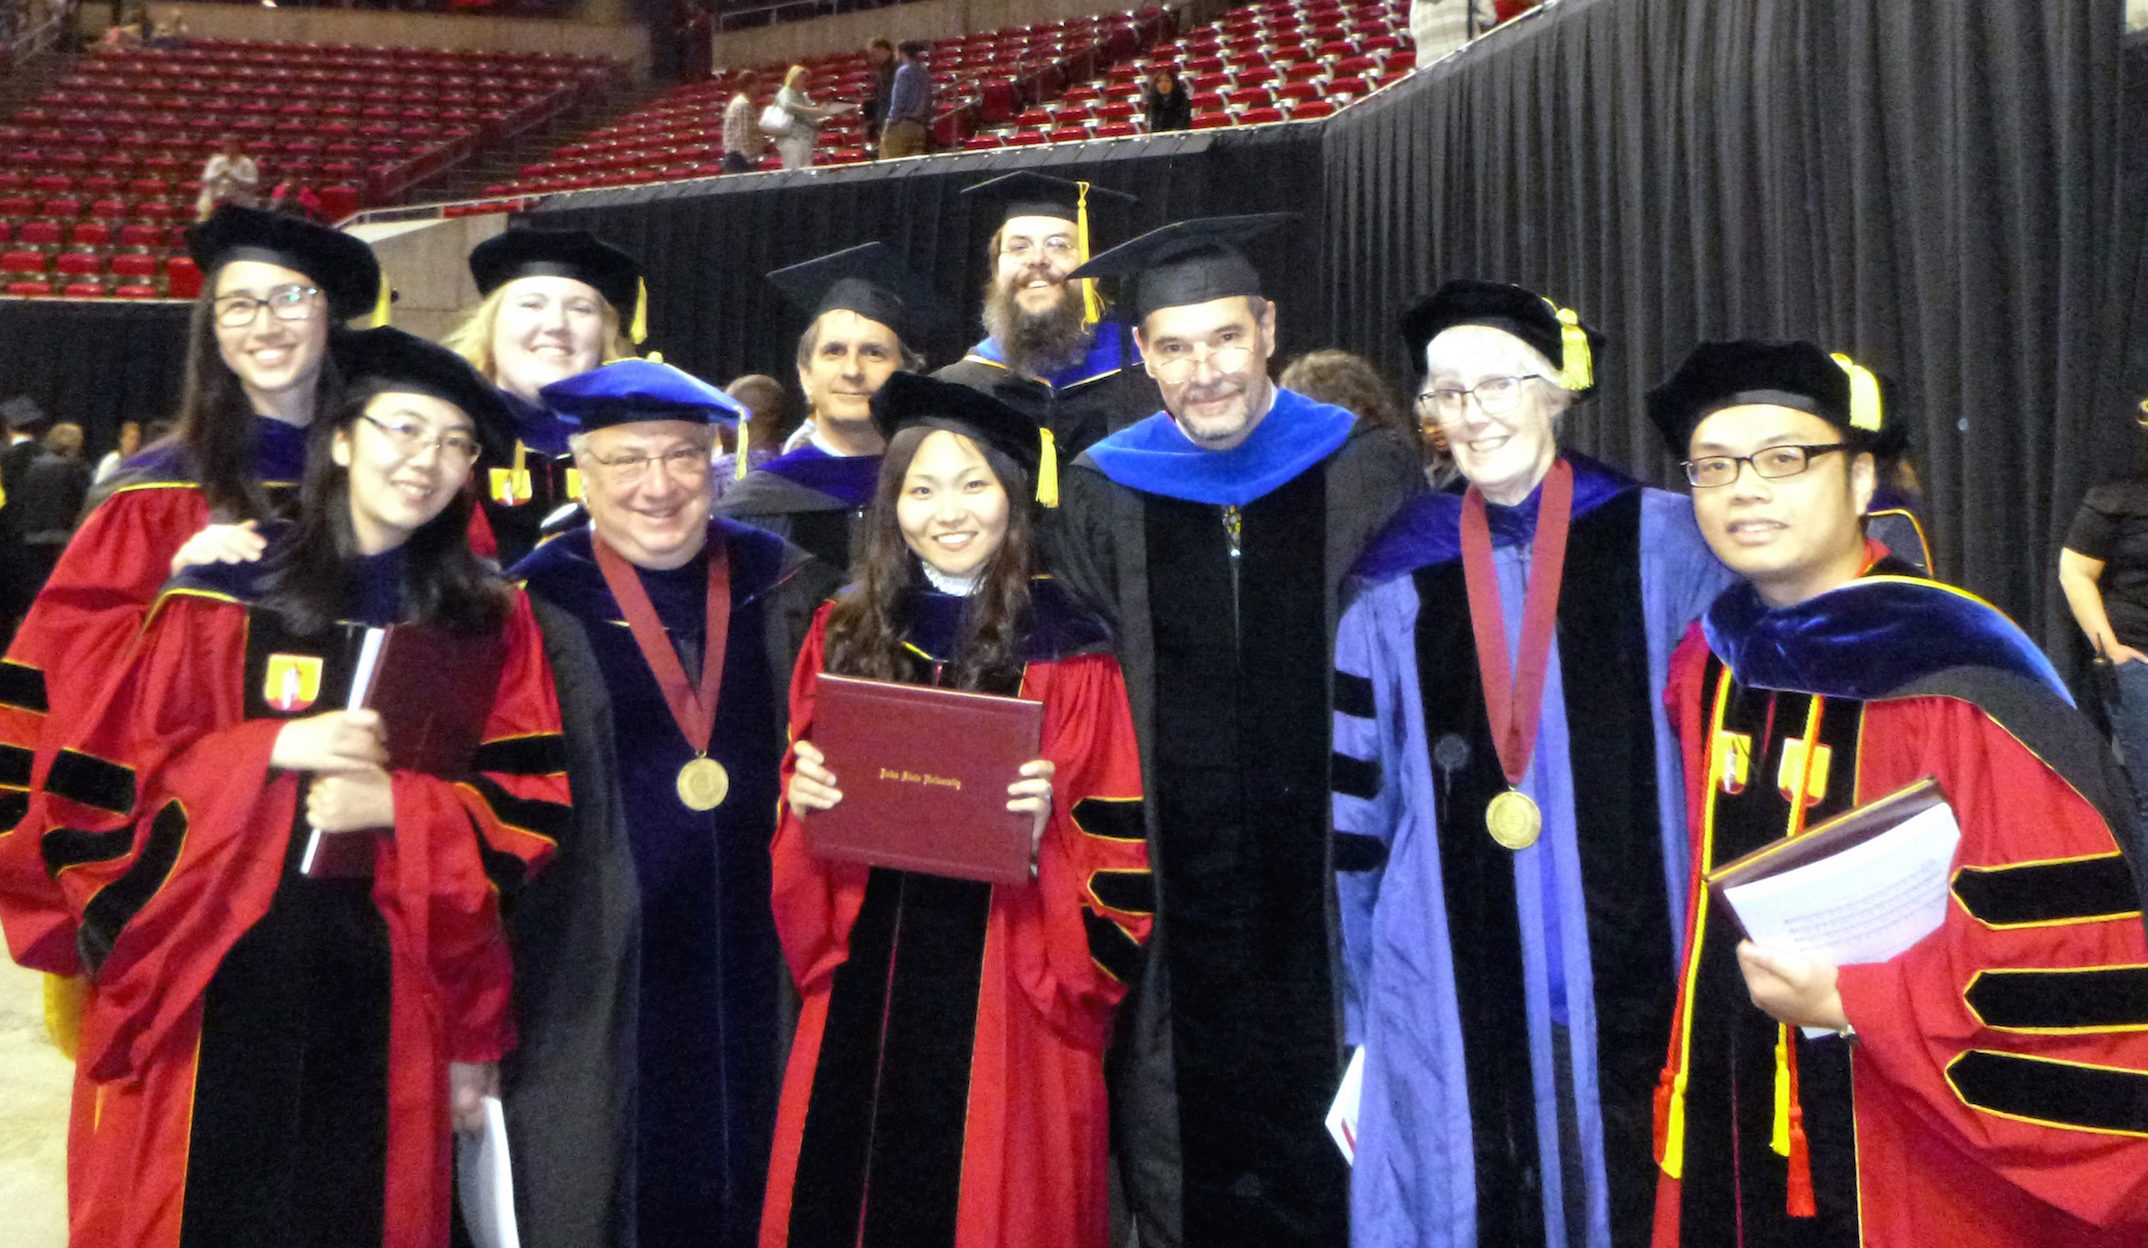 Graduate students and faculty pose in Hilton Coliseum at graduation.